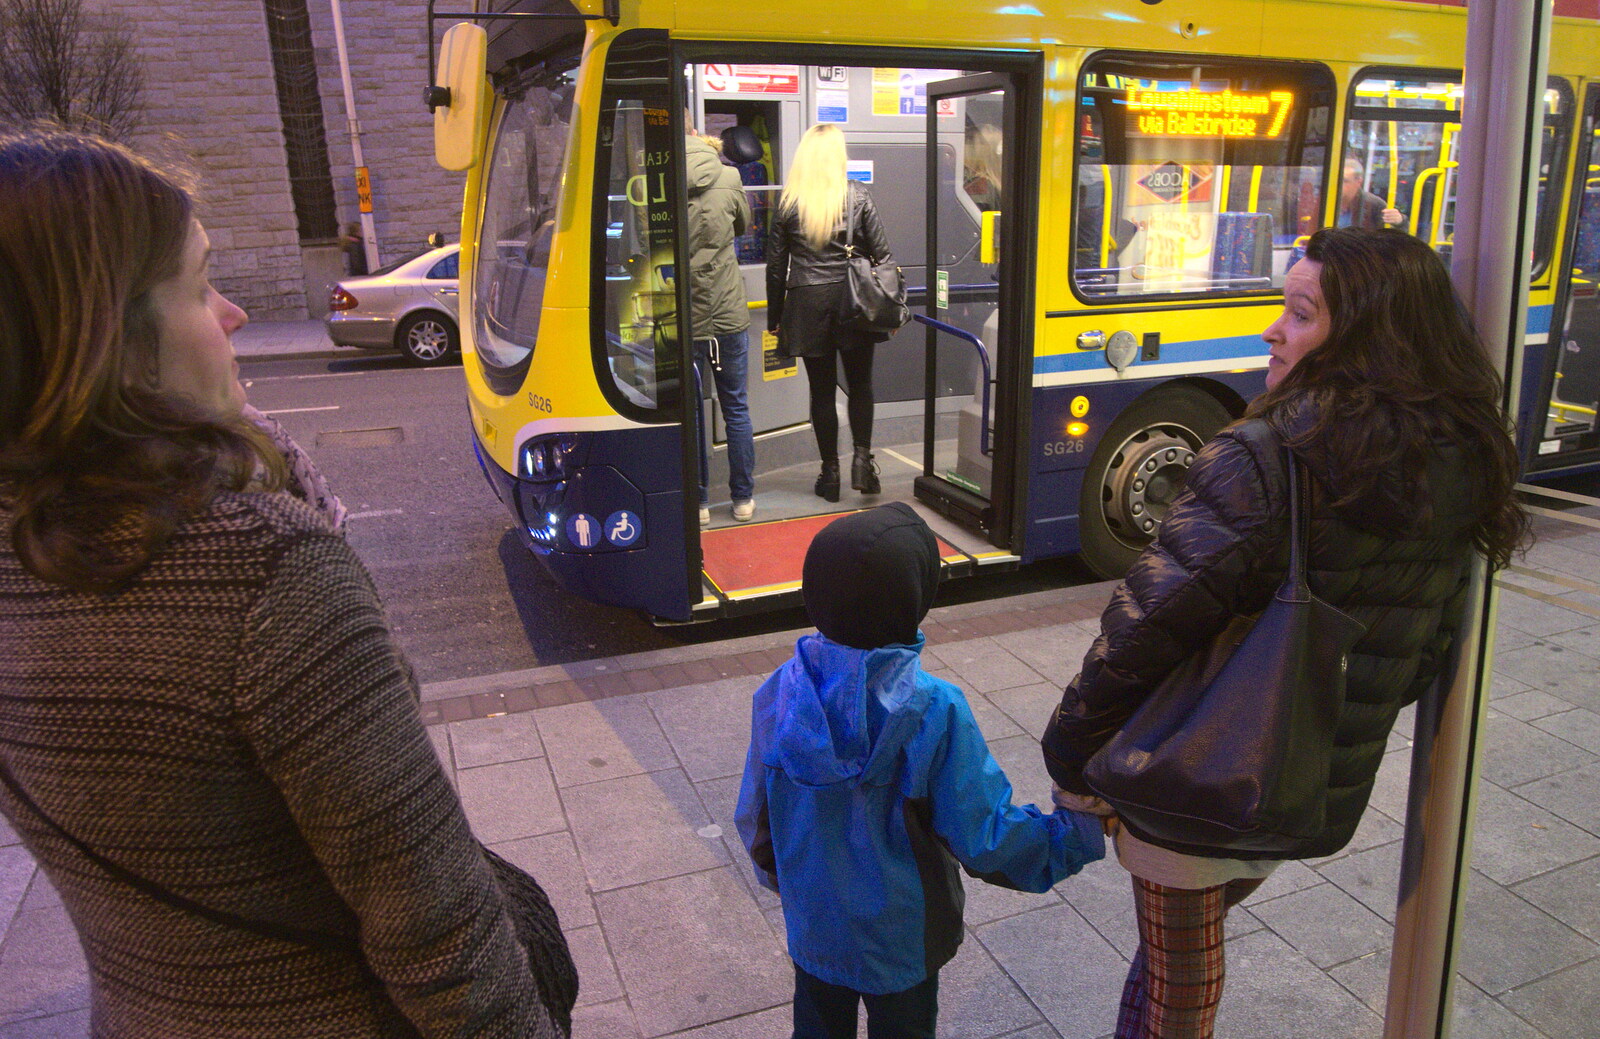 Waiting for the bus home from Temple Bar and Dun Laoghaire, Dublin, Ireland - 16th April 2015